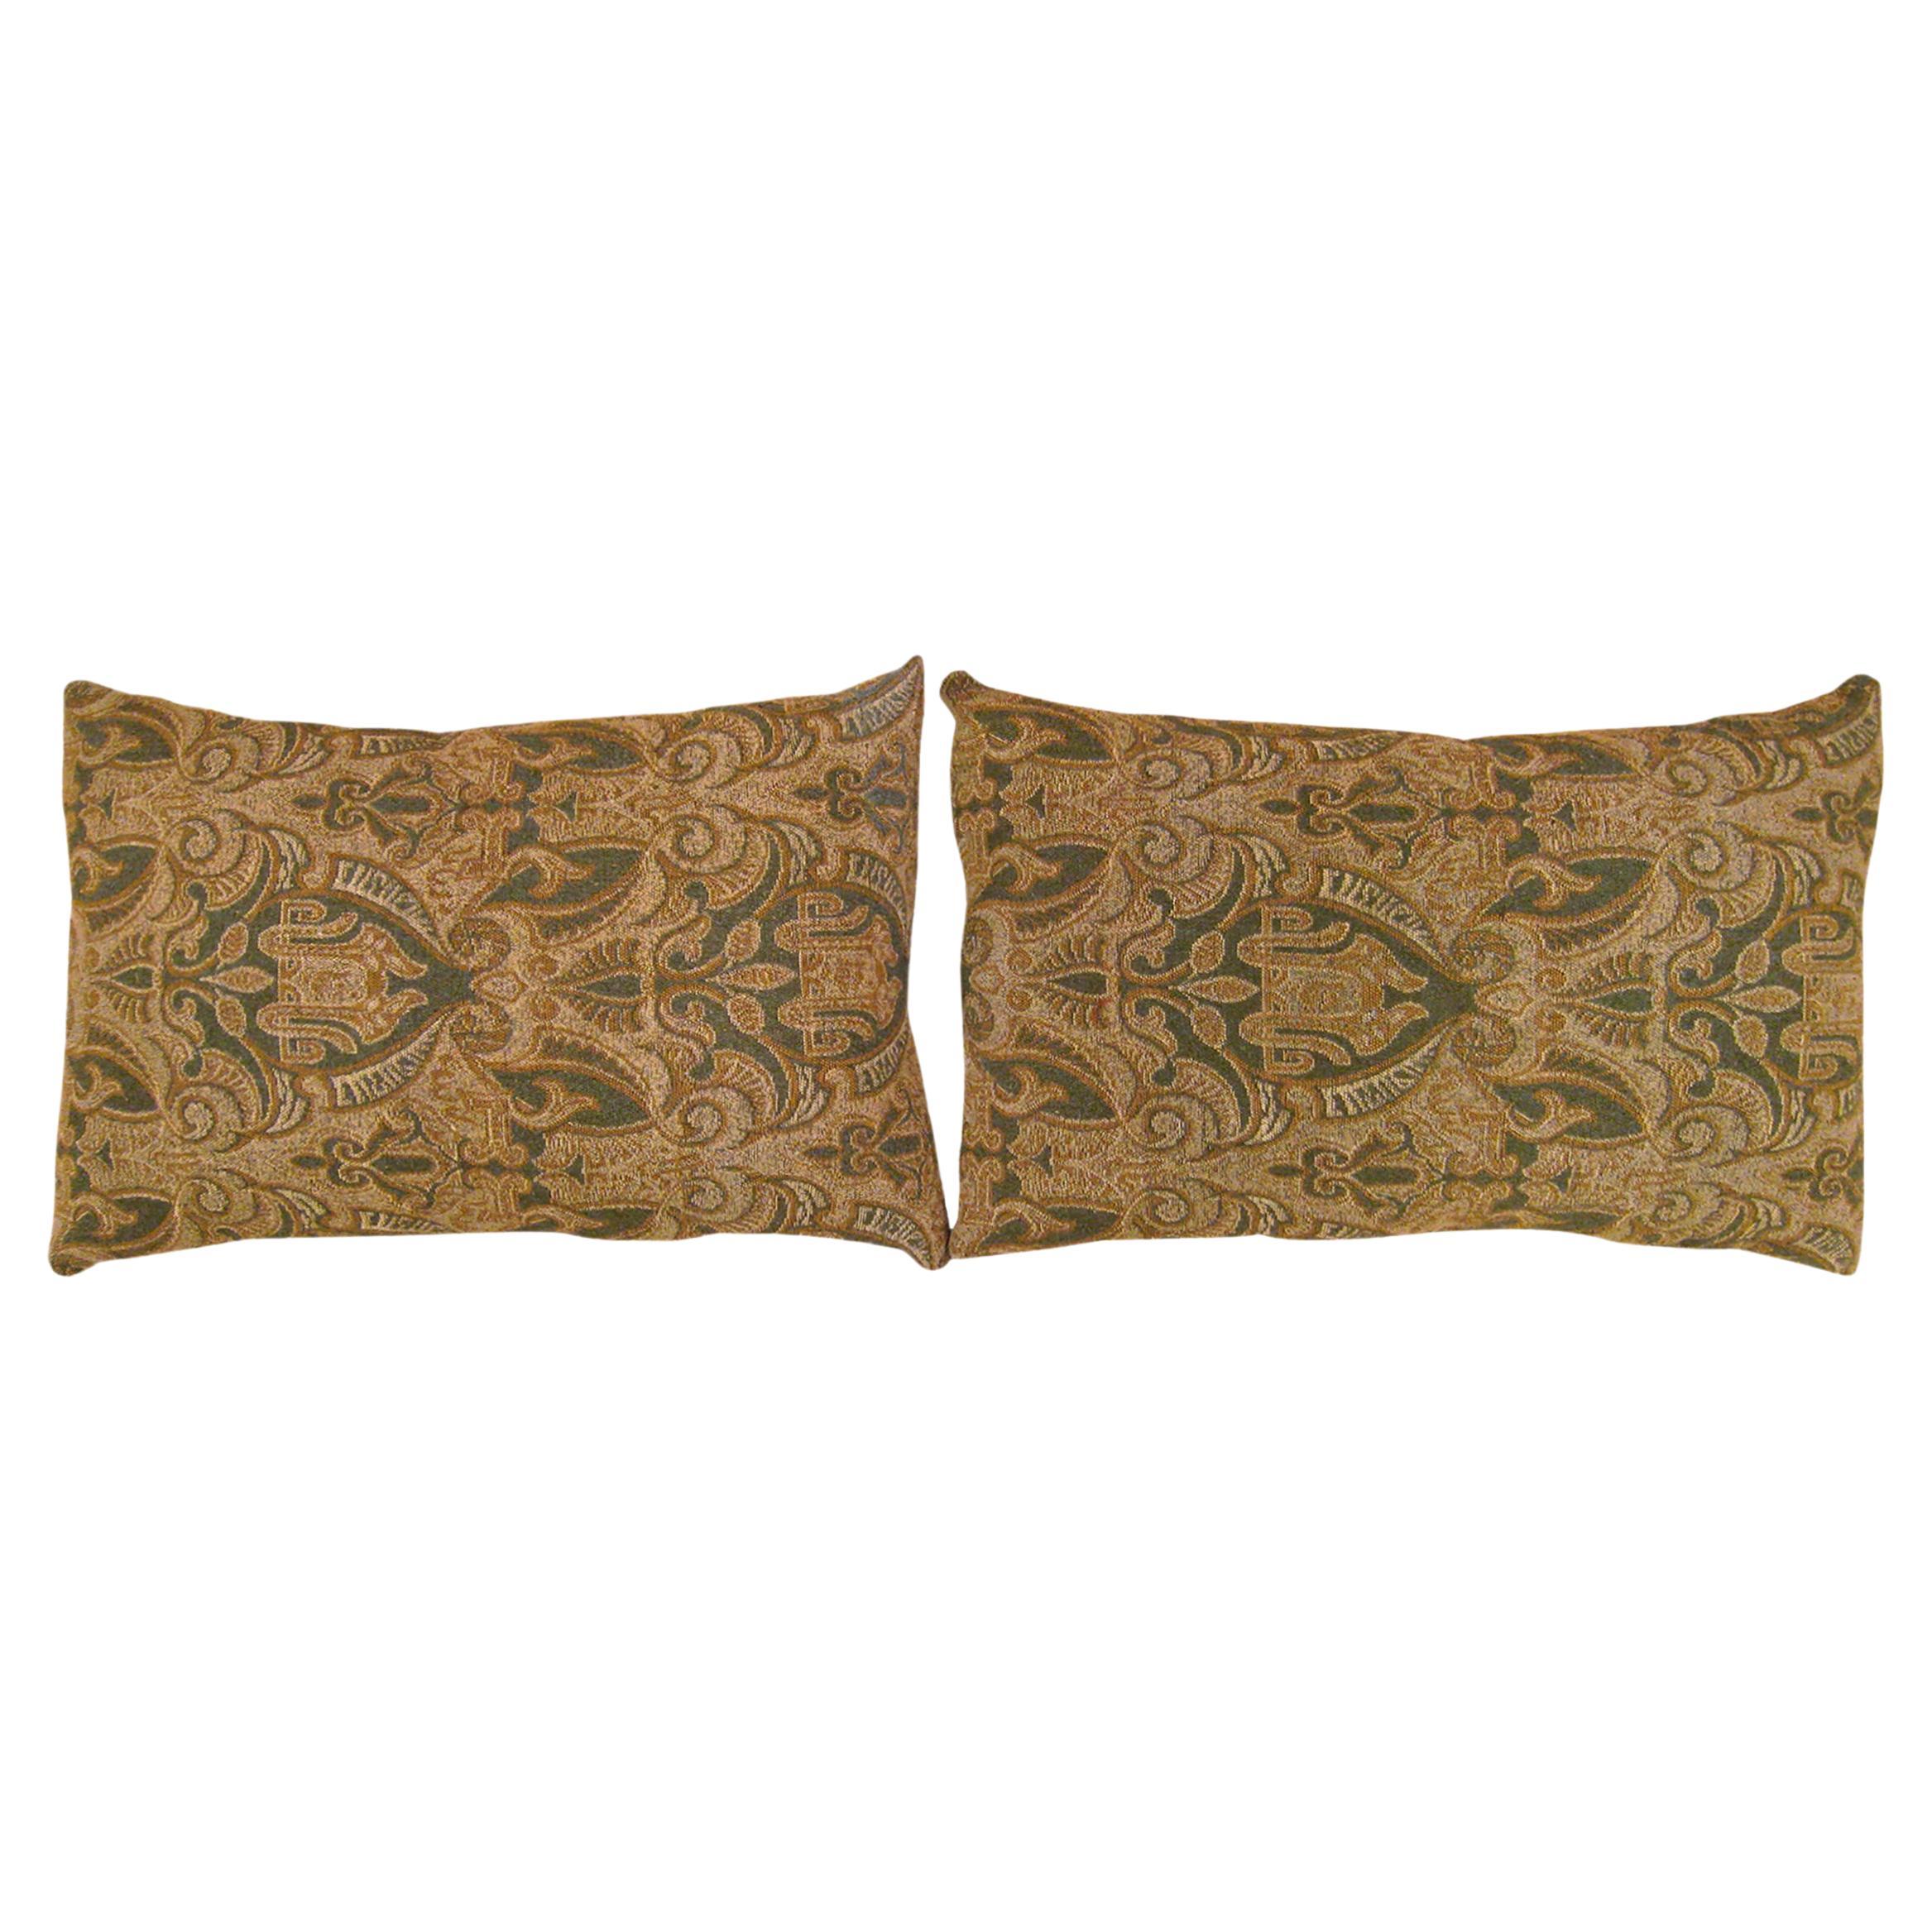 Pair of Decorative Antique Jacquard Tapestry Pillows with Geometric Abstracts  For Sale